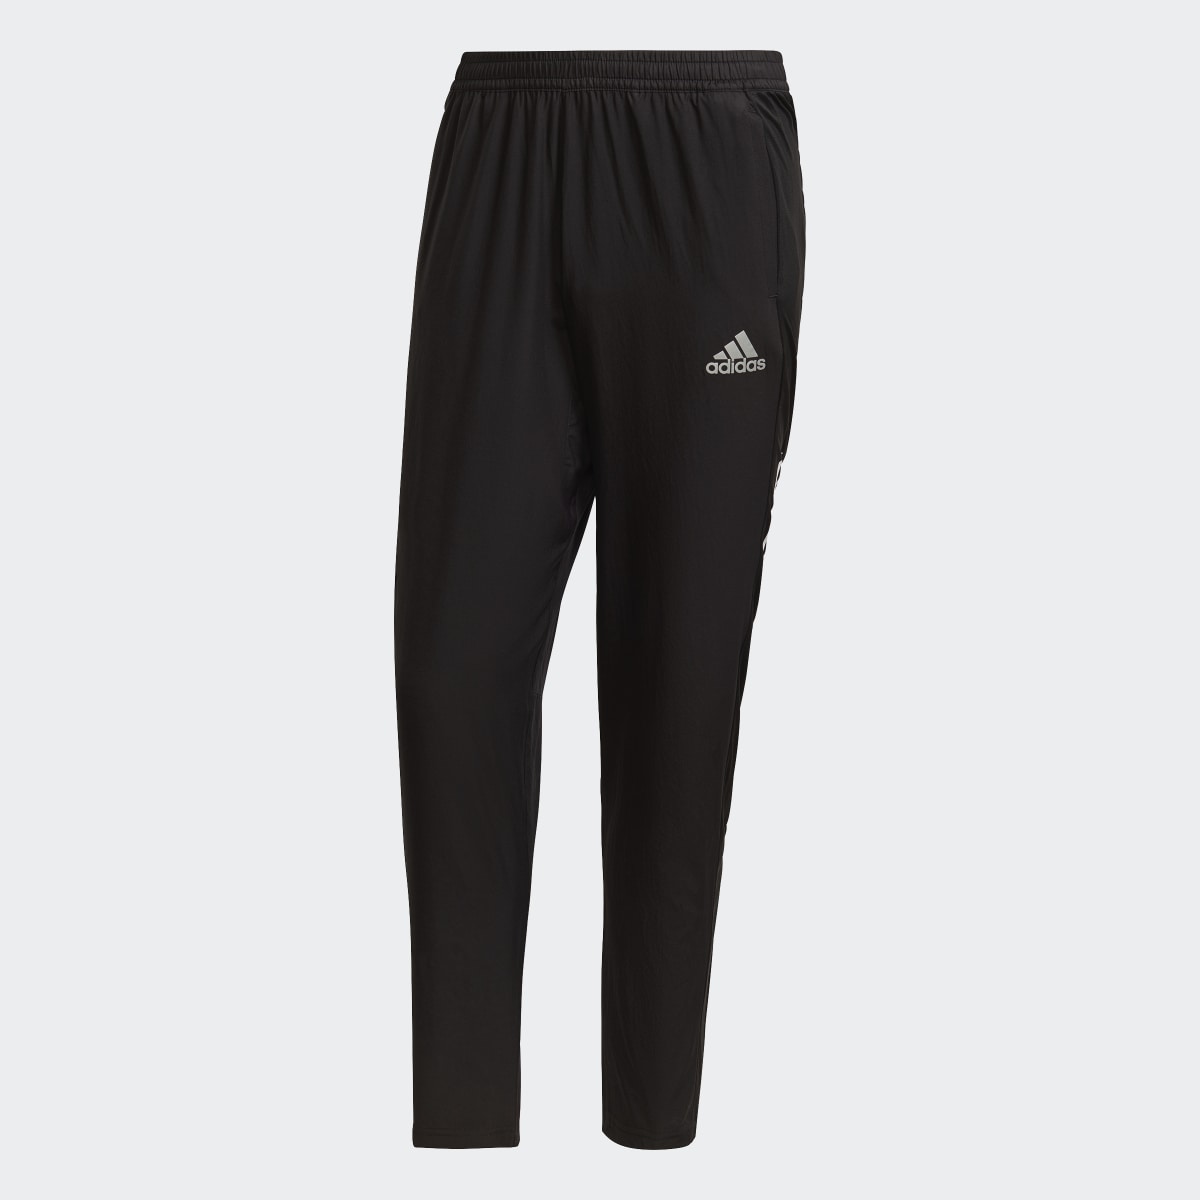 Adidas Own The Run Astro Wind Joggers. 5